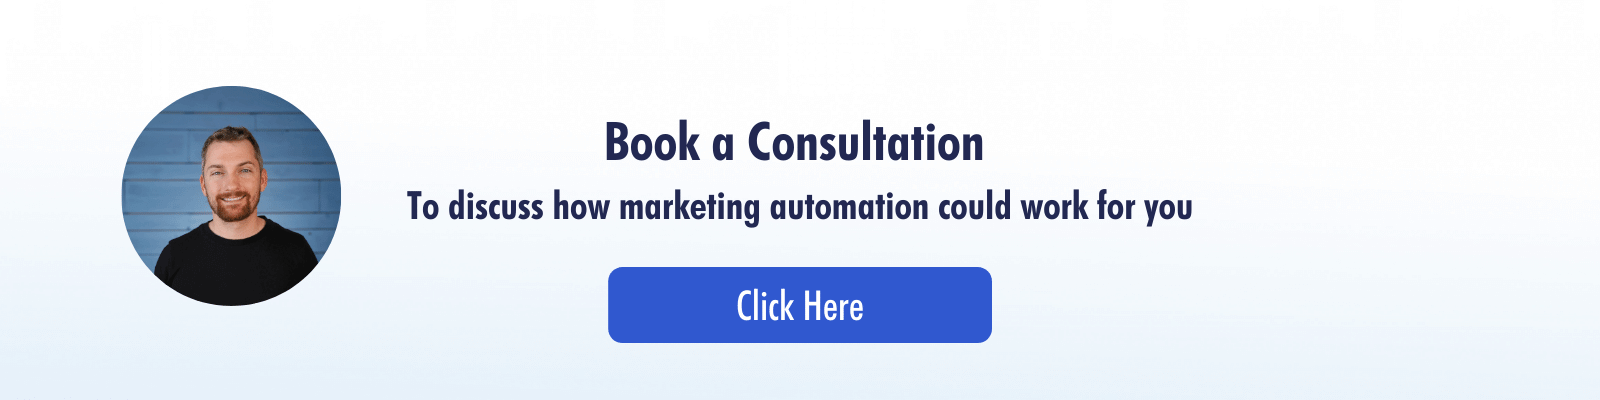 book a consultation with Project Prospecta